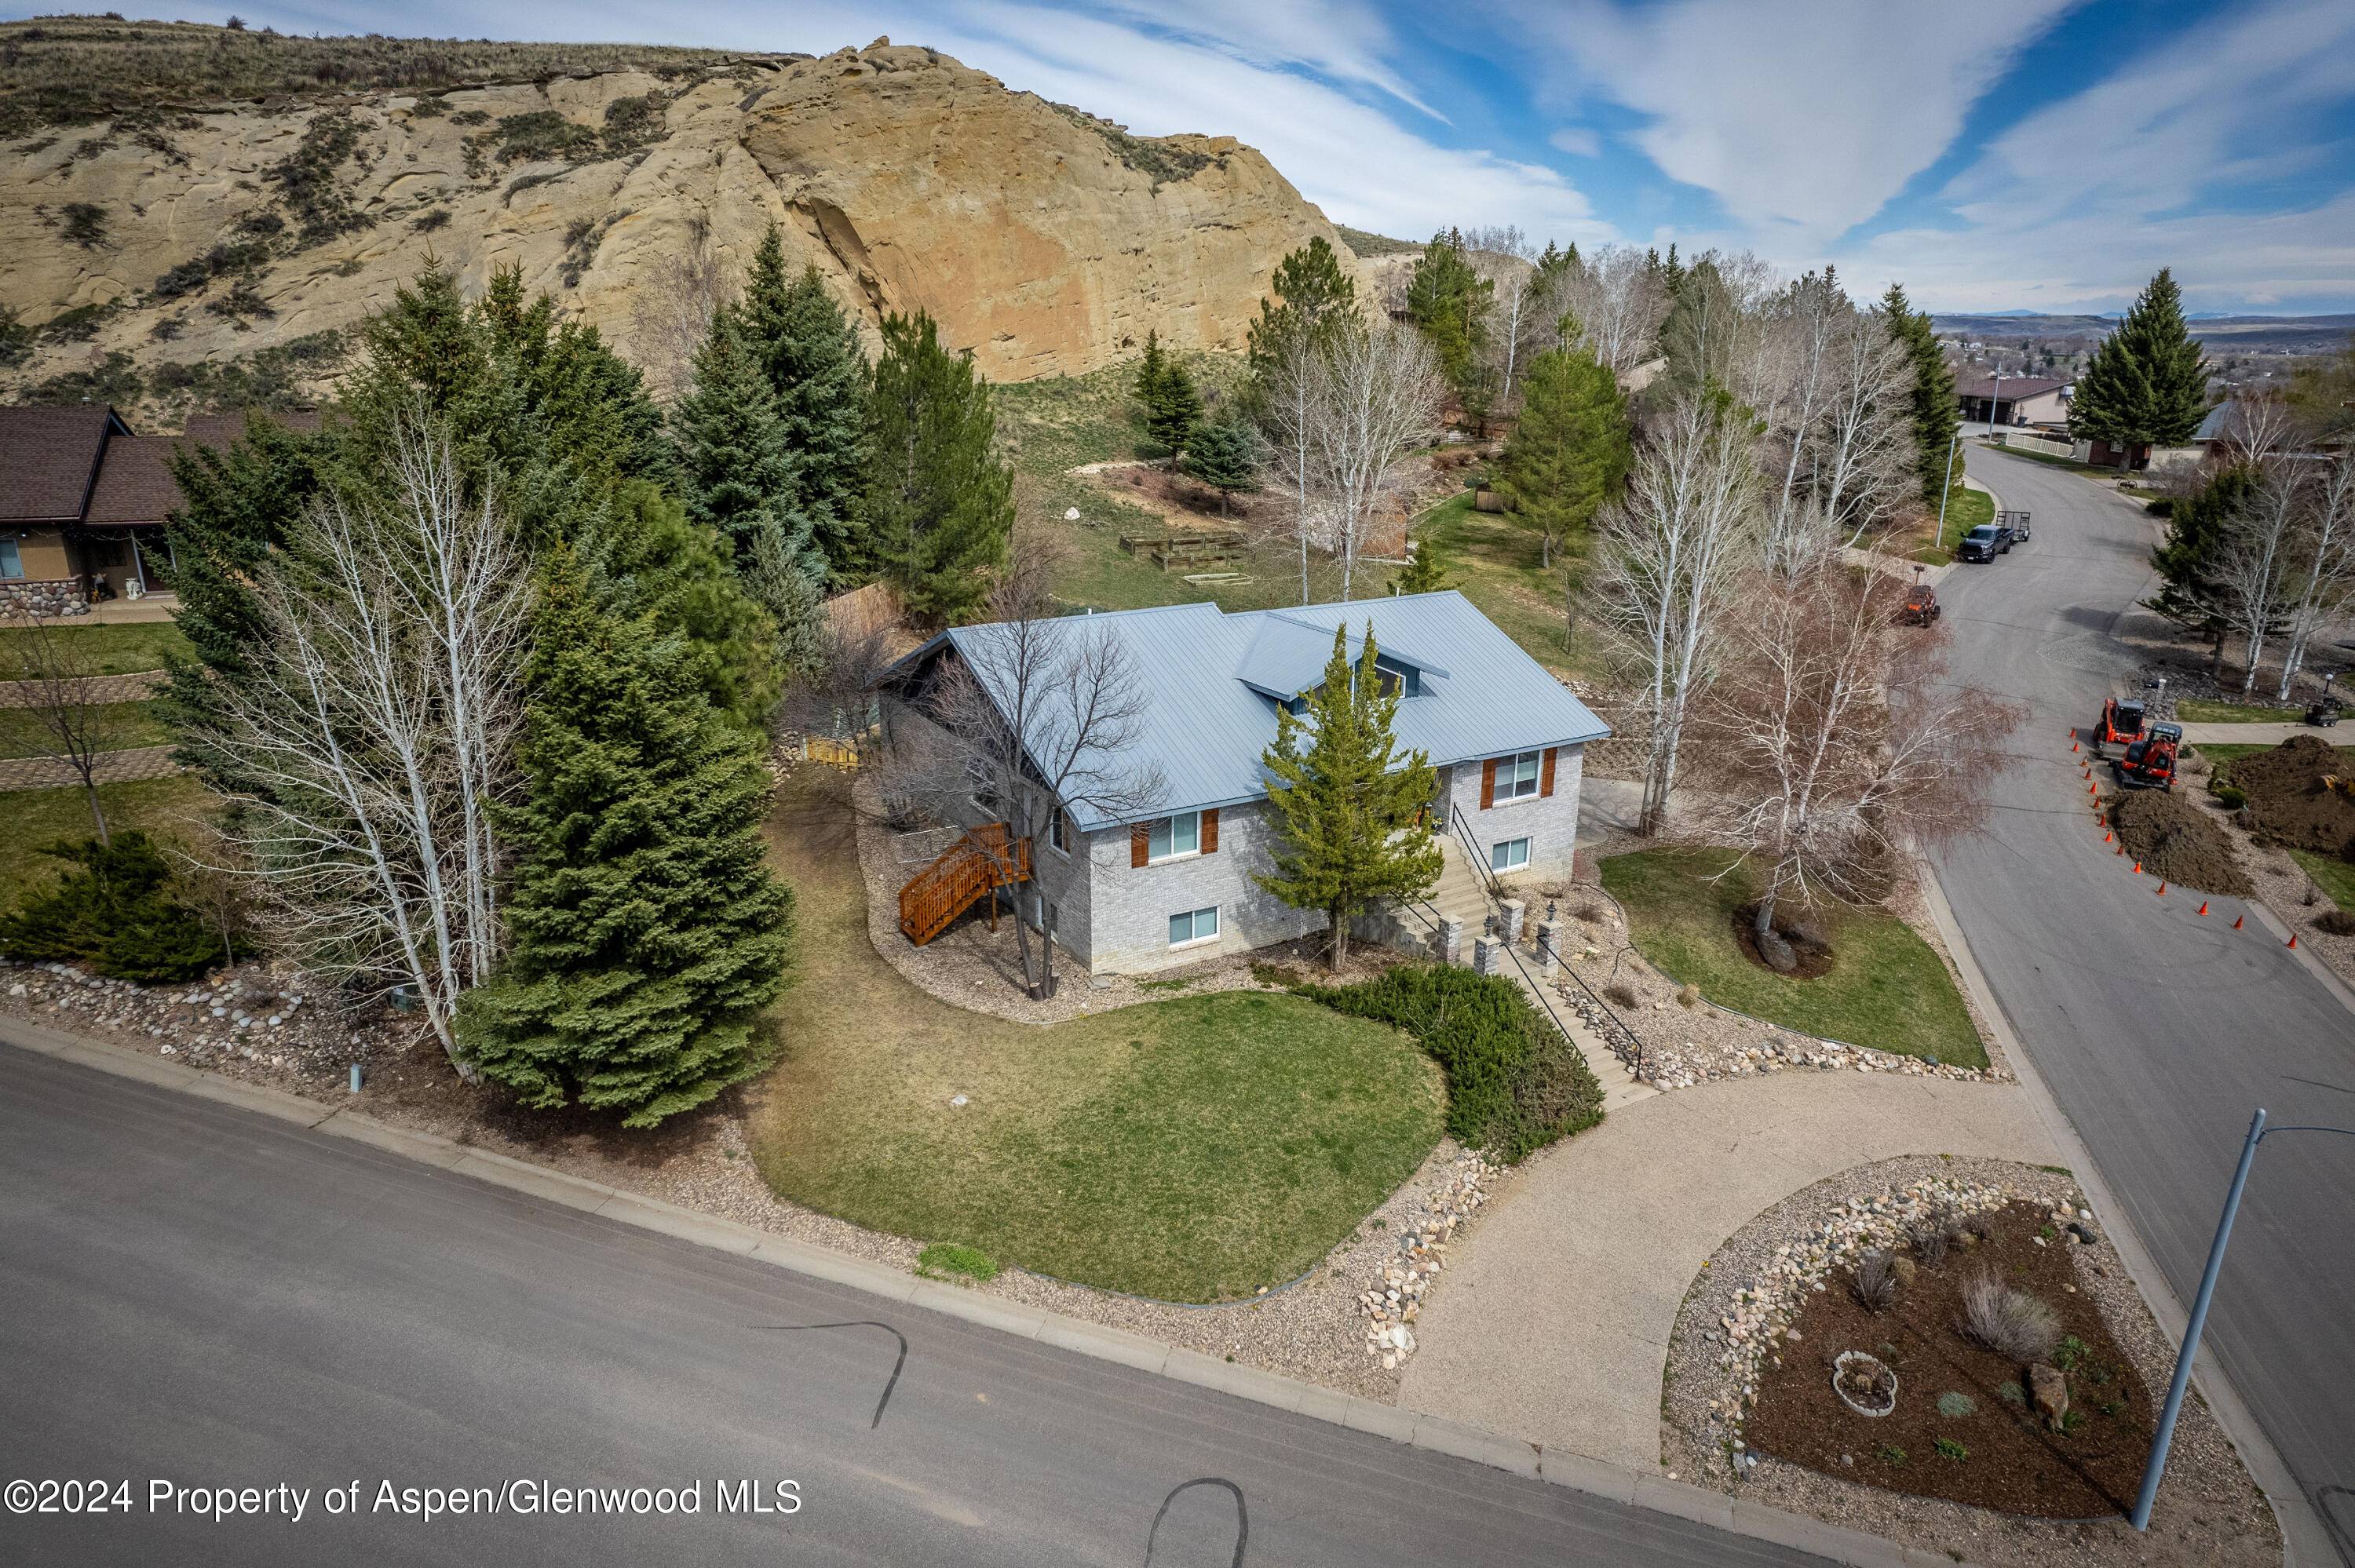 Welcome to this exceptional custom home, perfectly situated on an oversized lot that combines the convenience of town living with the tranquility of privacy.